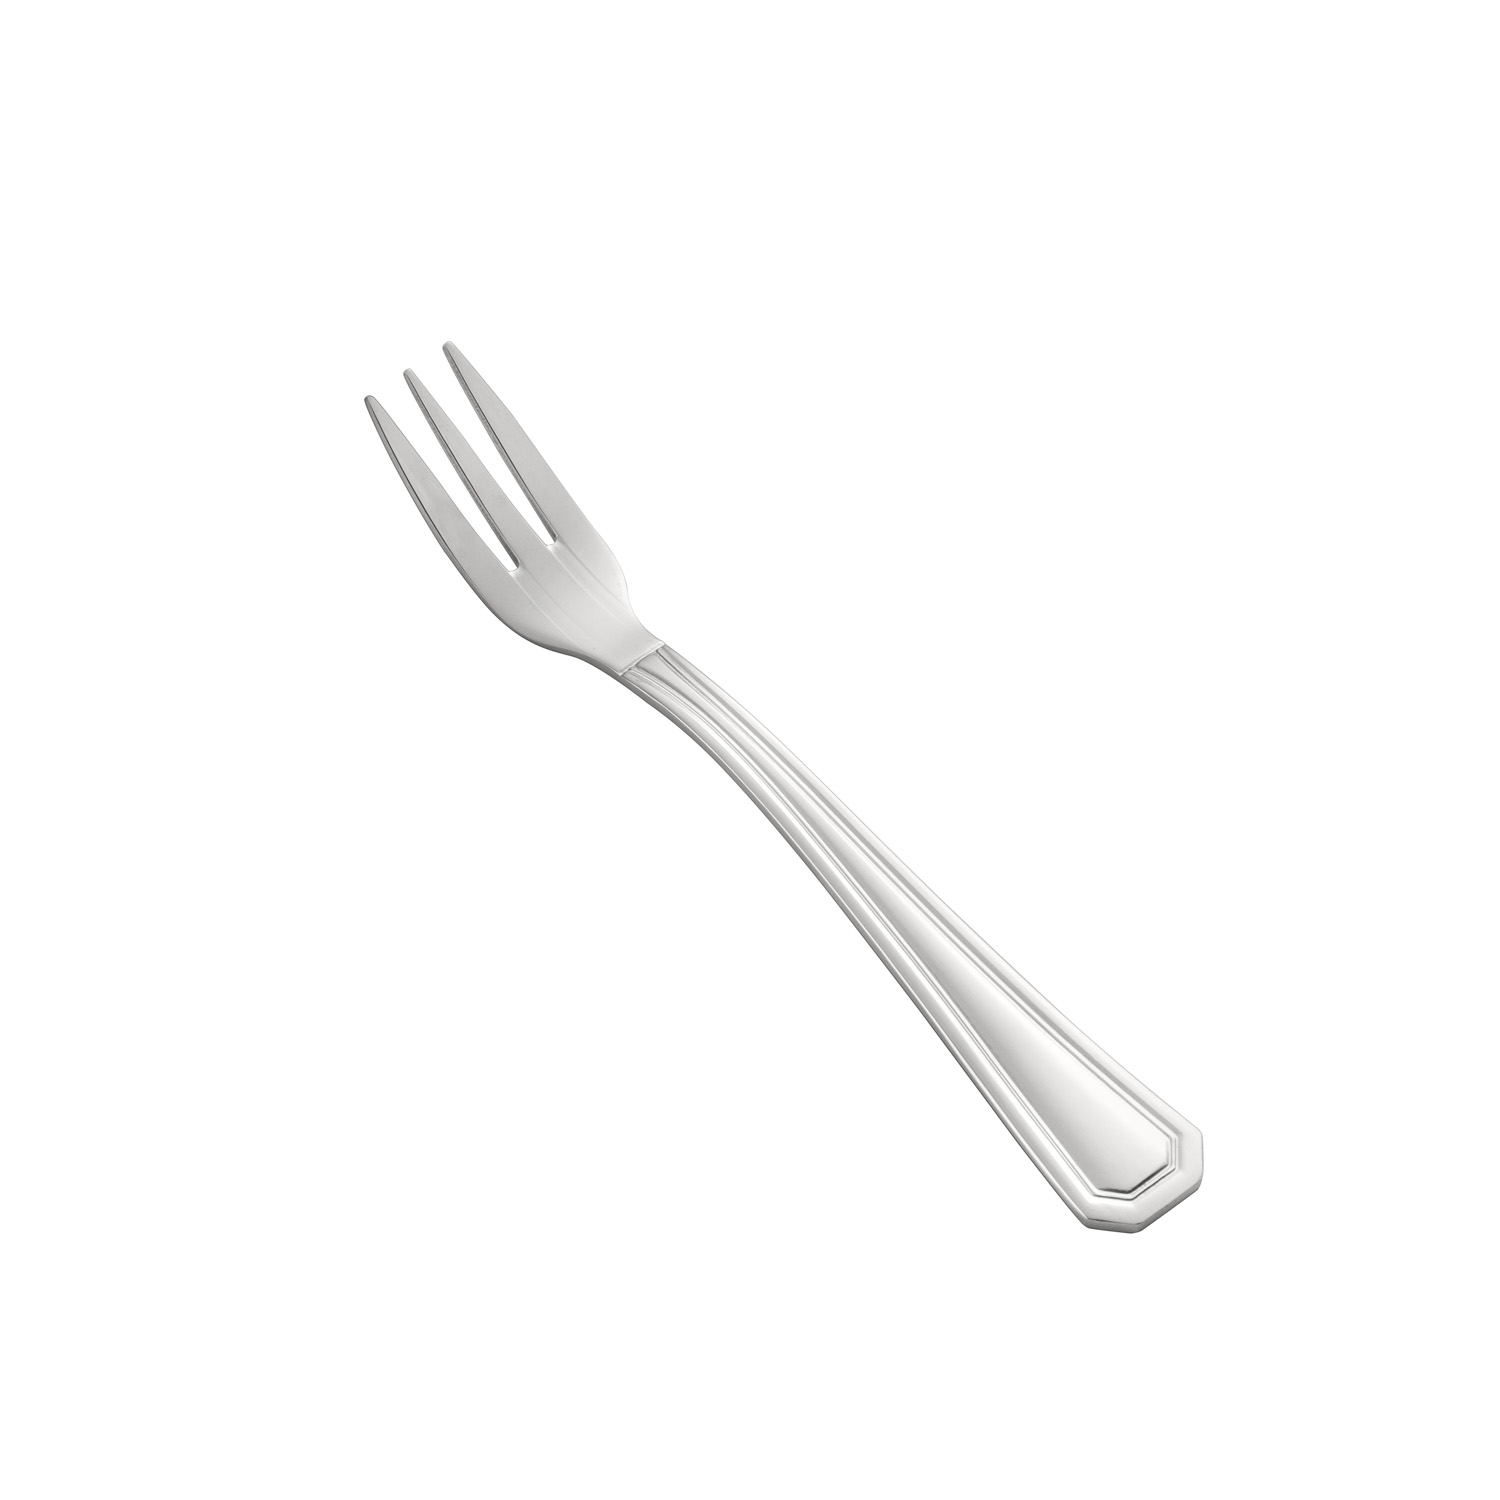 CAC China 8006-07 Lux Oyster Fork, Extra Heavy Weight 18/8, 5 5/8" - 1 dozen